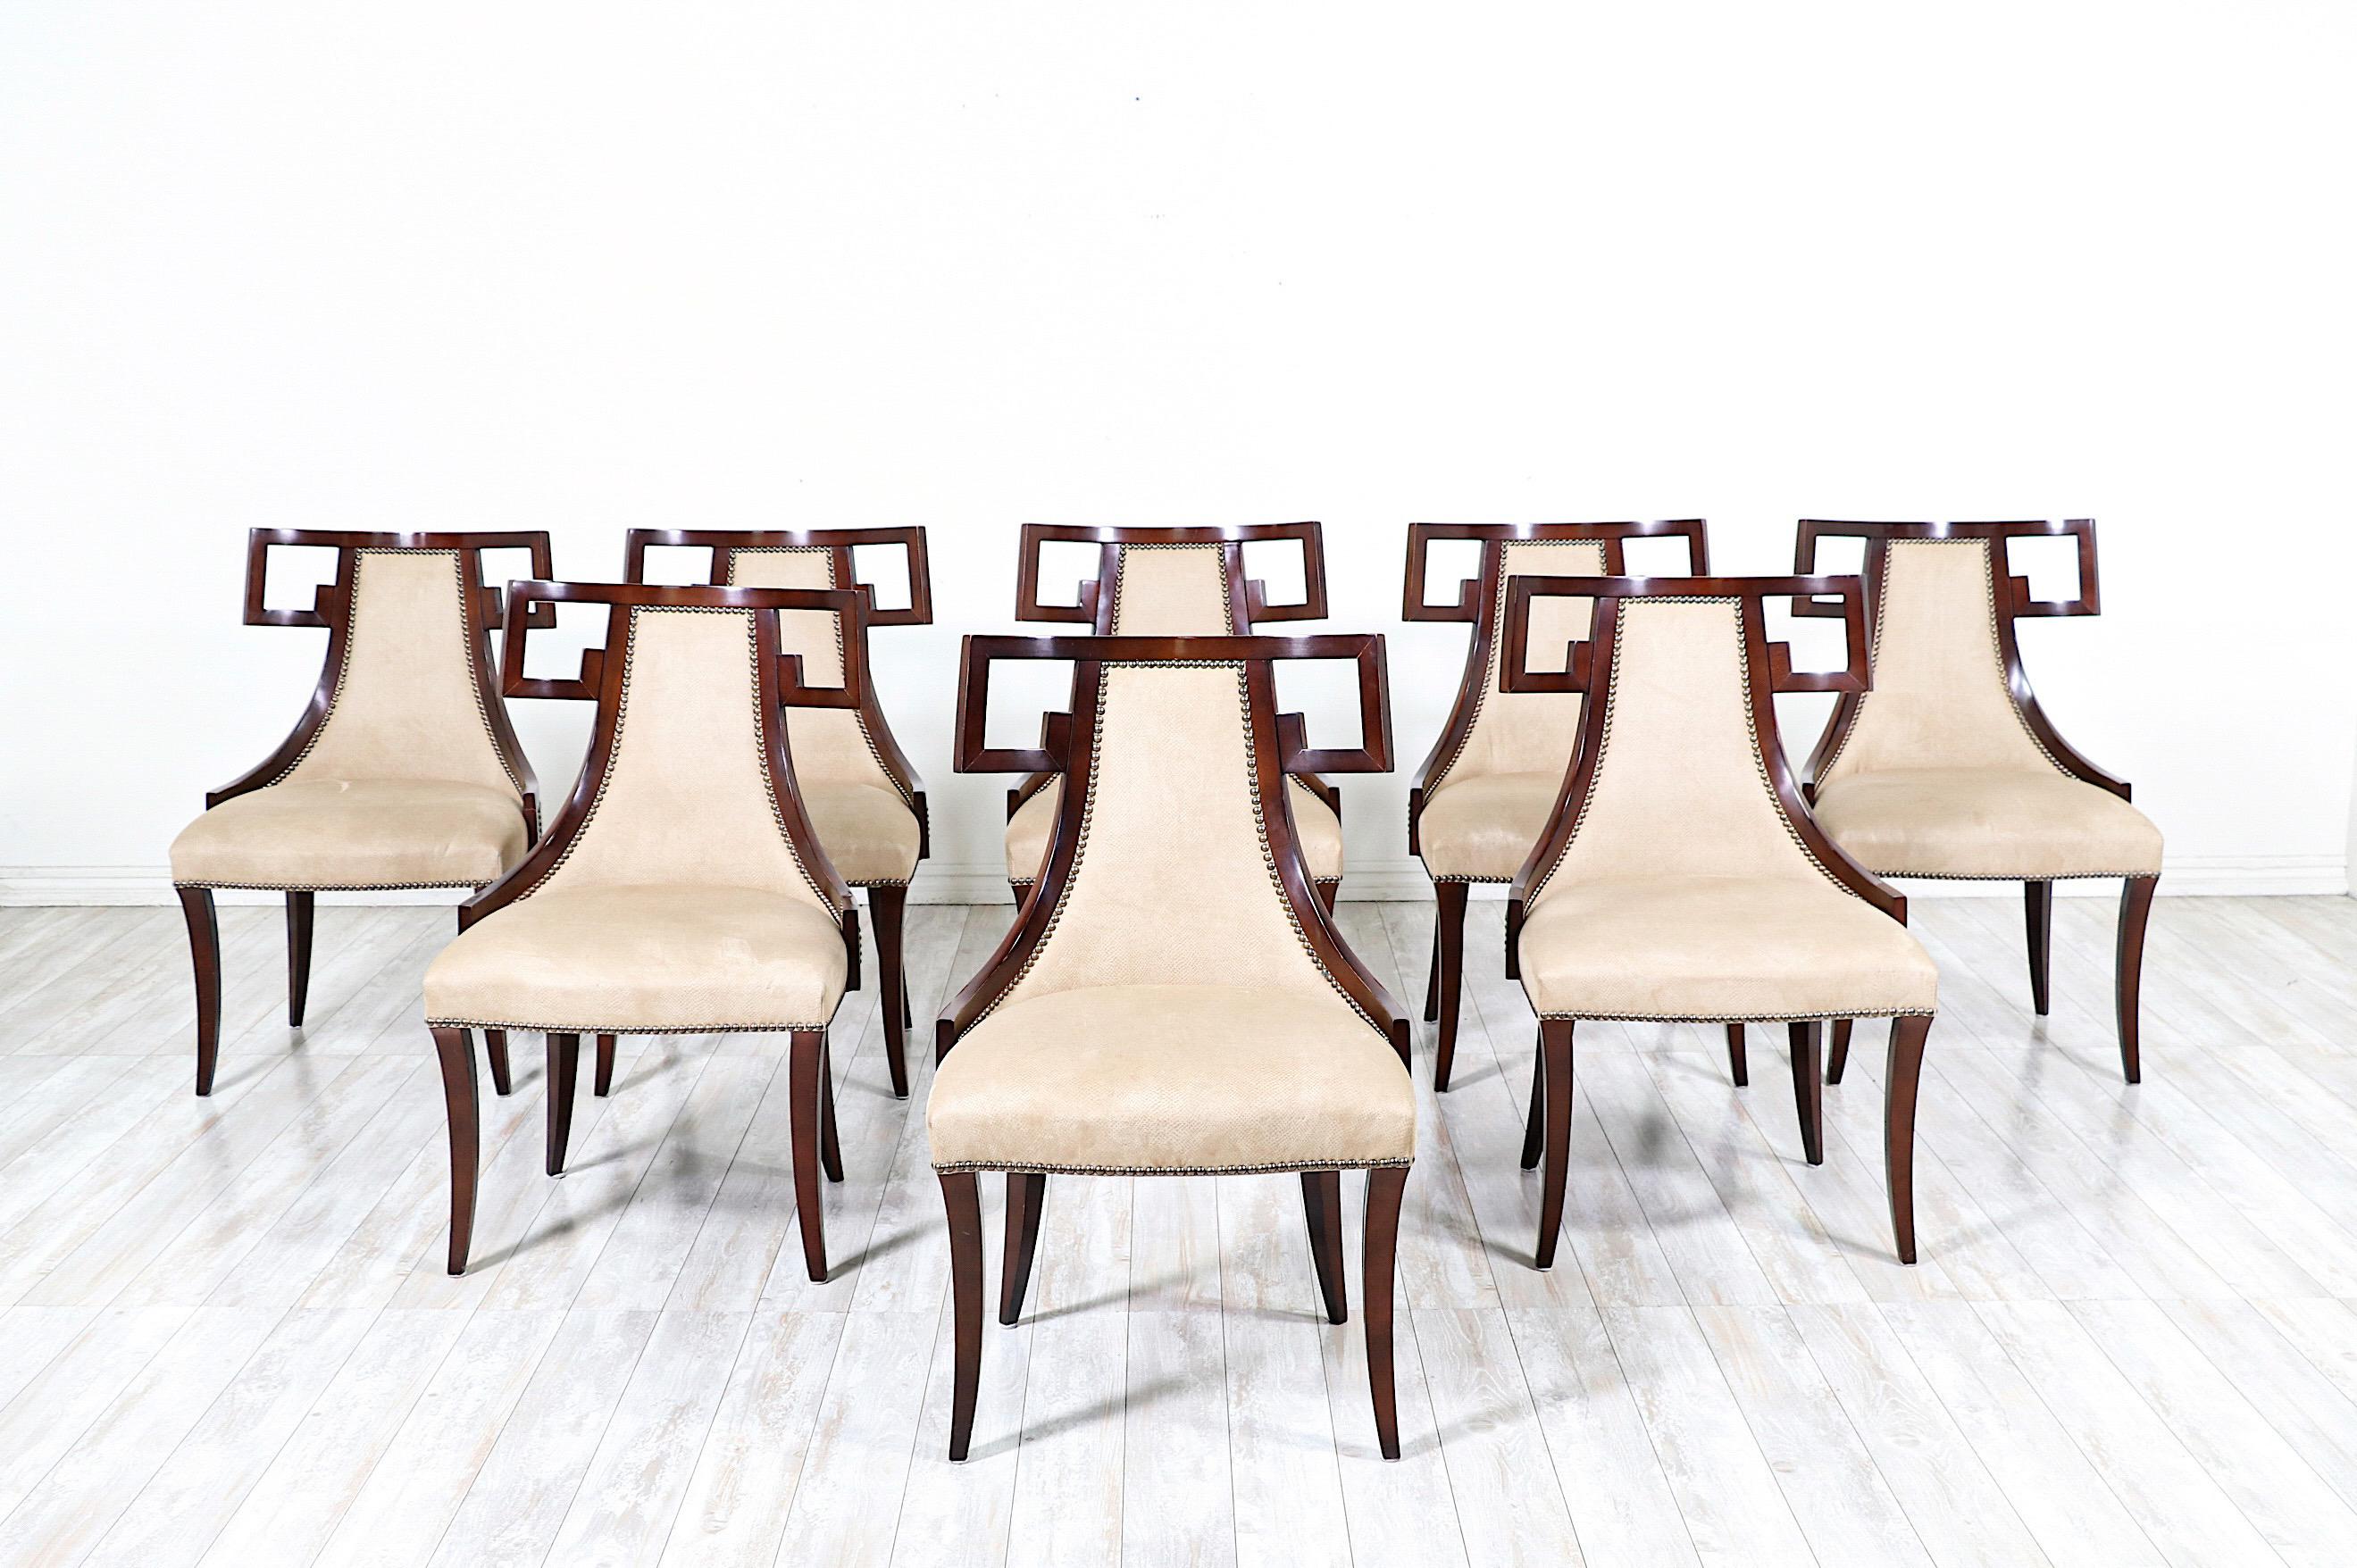 Fantastic, set of 8 “Greek” dining chairs designed by Thomas Pheasant for Baker Furniture. 

The “Greek” chair, model #7849, features clean, classic lines inspired by the timeless in design Greek klismos chairs of antiquity. 

The chairs retain